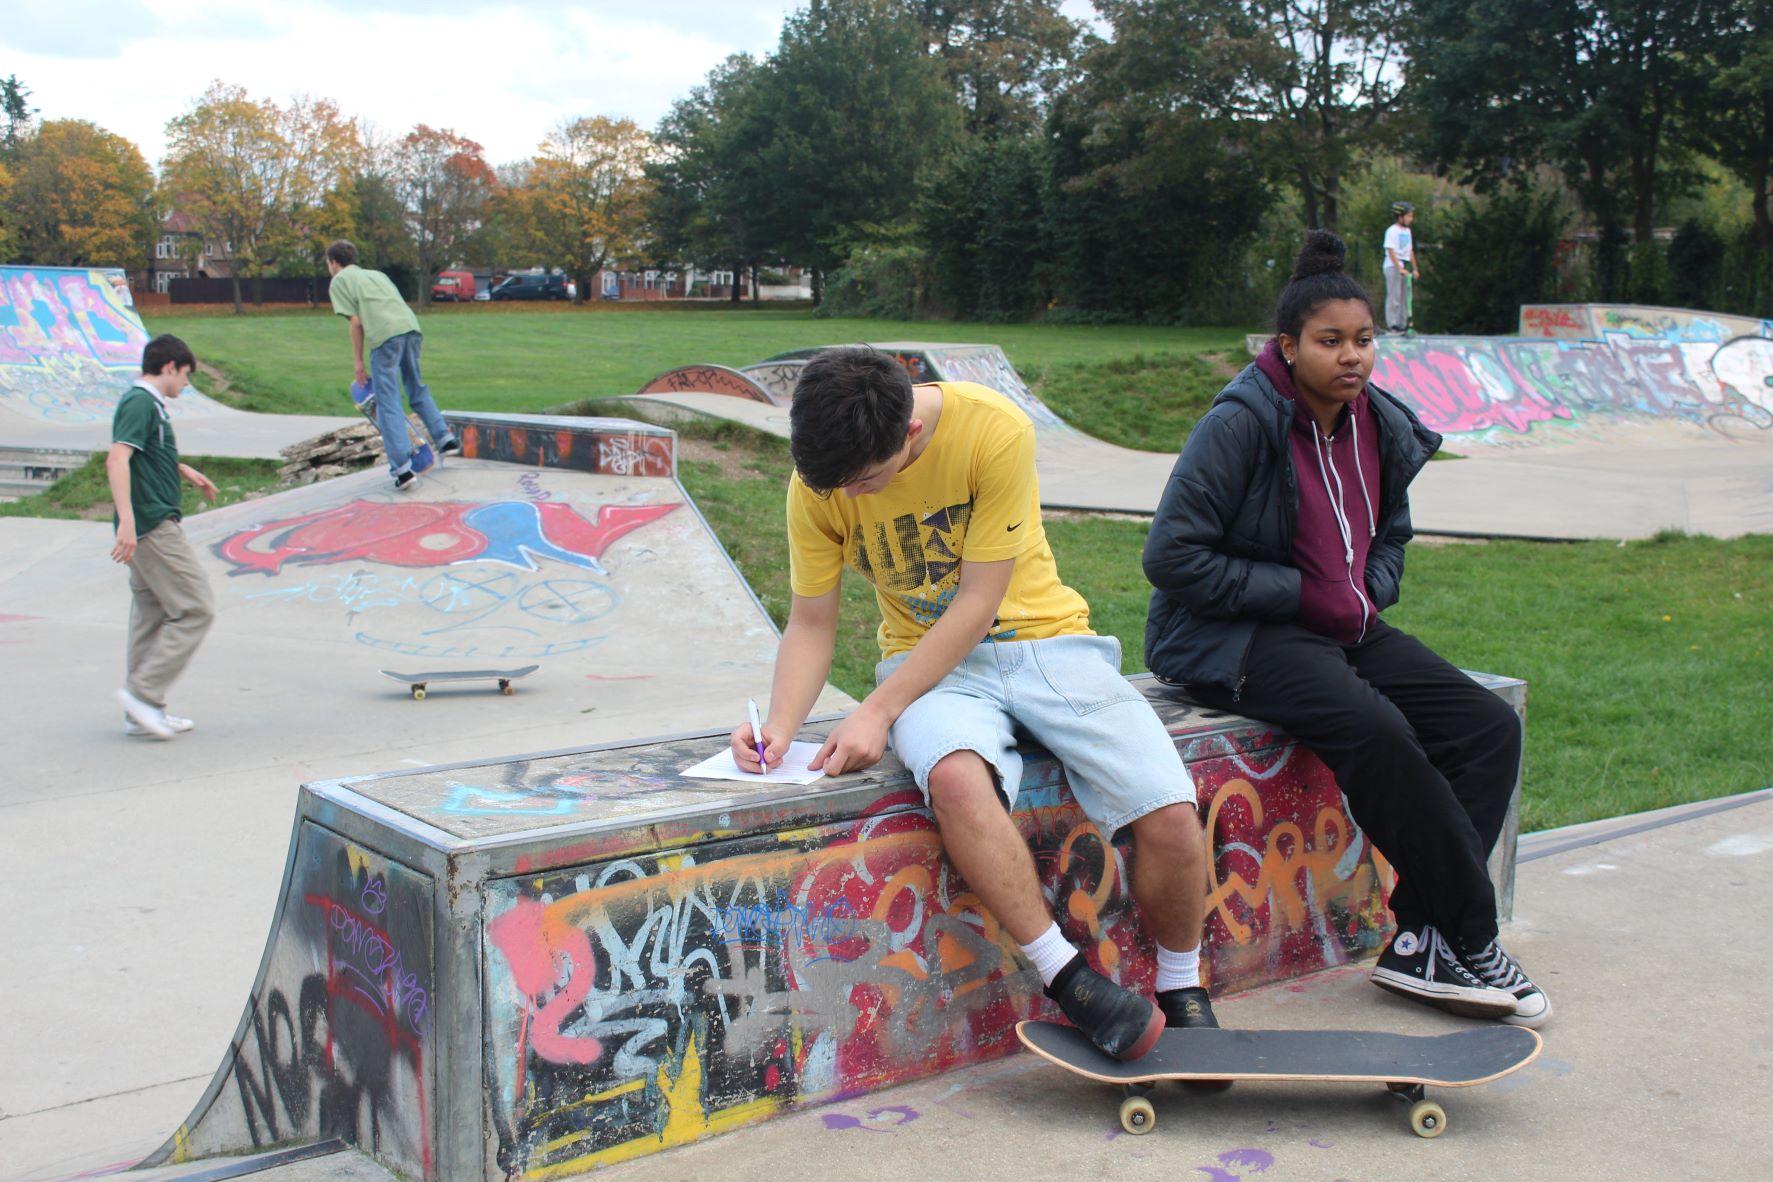 Colour photograph showing Roundwood Skatepark. In the foreground a young woman sits on a skate ramp next to a young man with a skateboard, writing on a piece of paper. In the background are two other young men, skating.